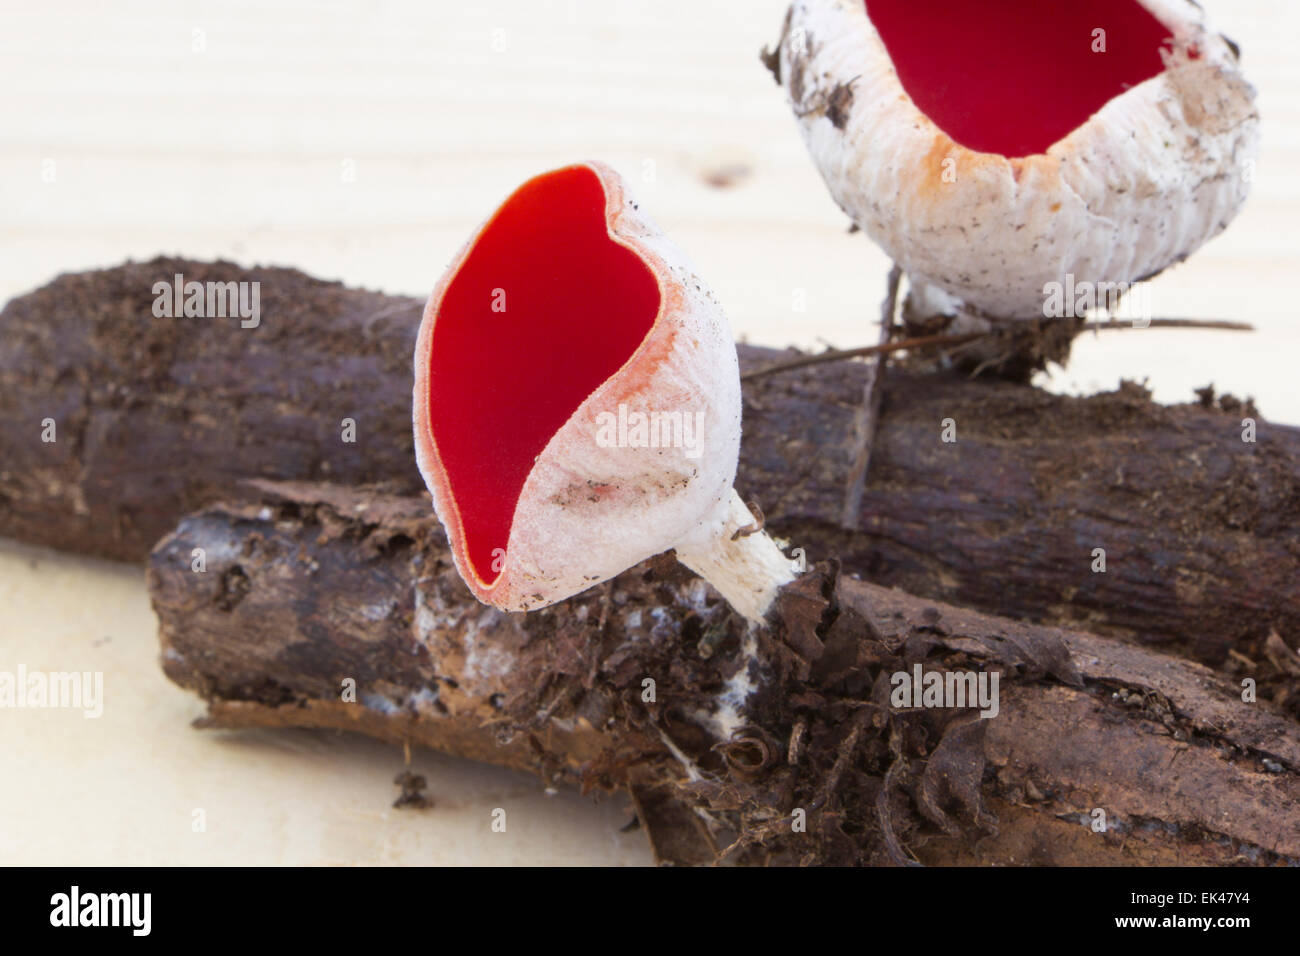 View of a branch with red fungus Sarcoscypha austriaca Stock Photo